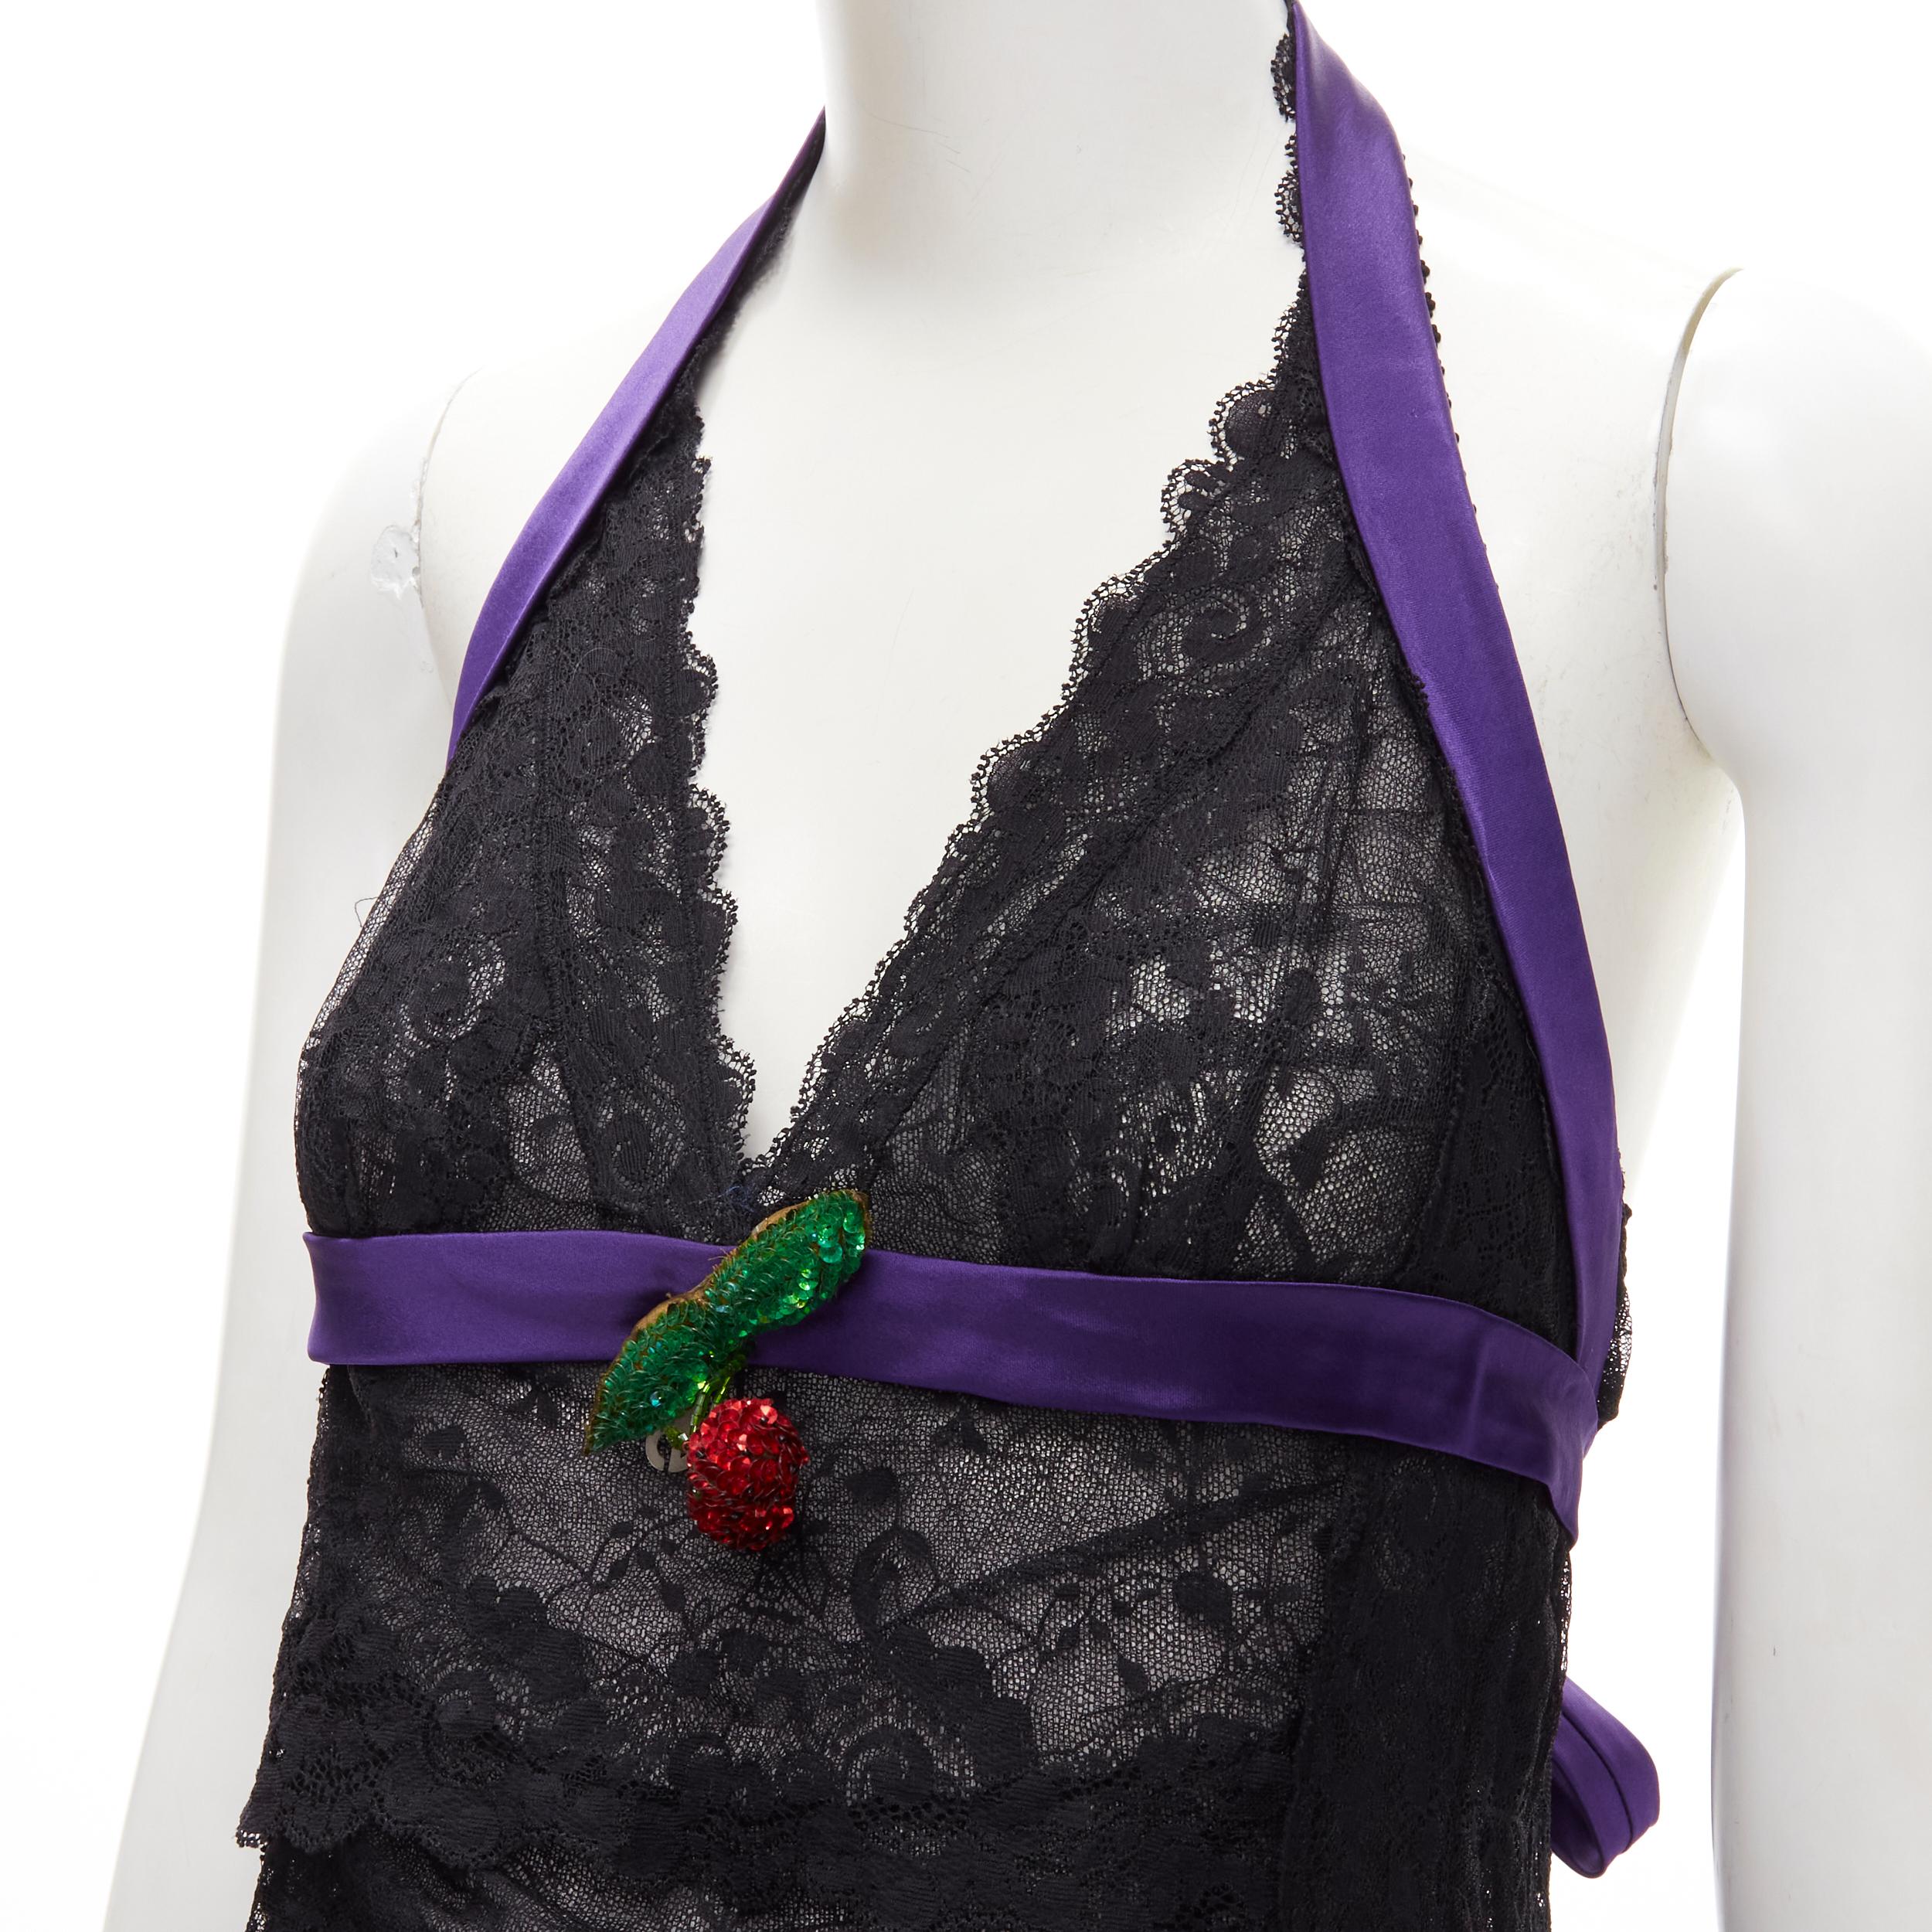 rare D&G DOLCE GABBANA Vintage cherry sequins charm black lace halter tie top S 
Reference: ANWU/A00603 
Brand: D&G 
Material: Feels like lace 
Color: Black 
Pattern: Lace 
Closure: Halter 
Extra Detail: Sequins embellished cherry brooch at bust